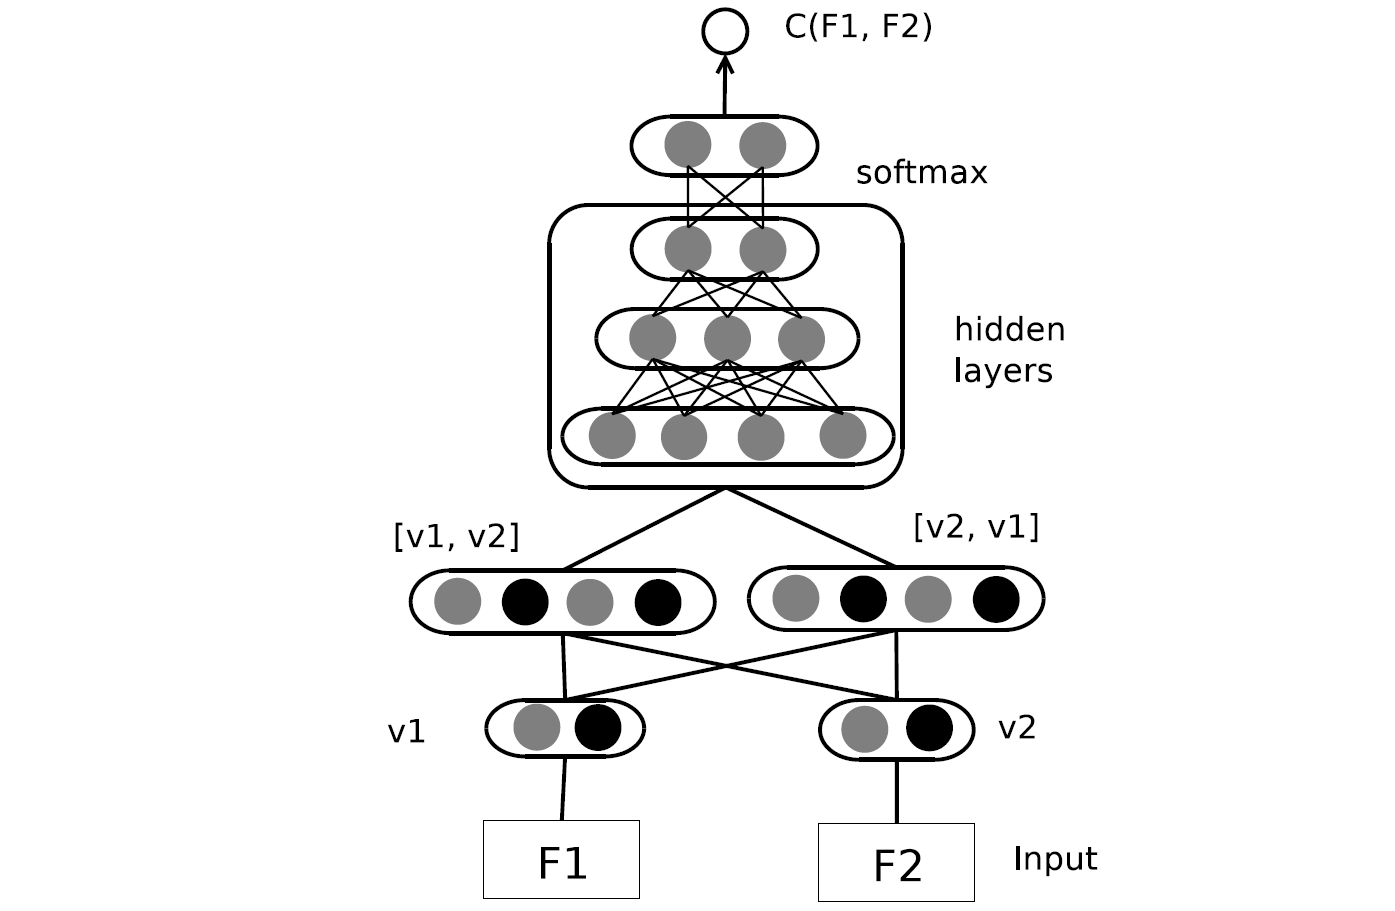 The architecture of the deep fusion learning model